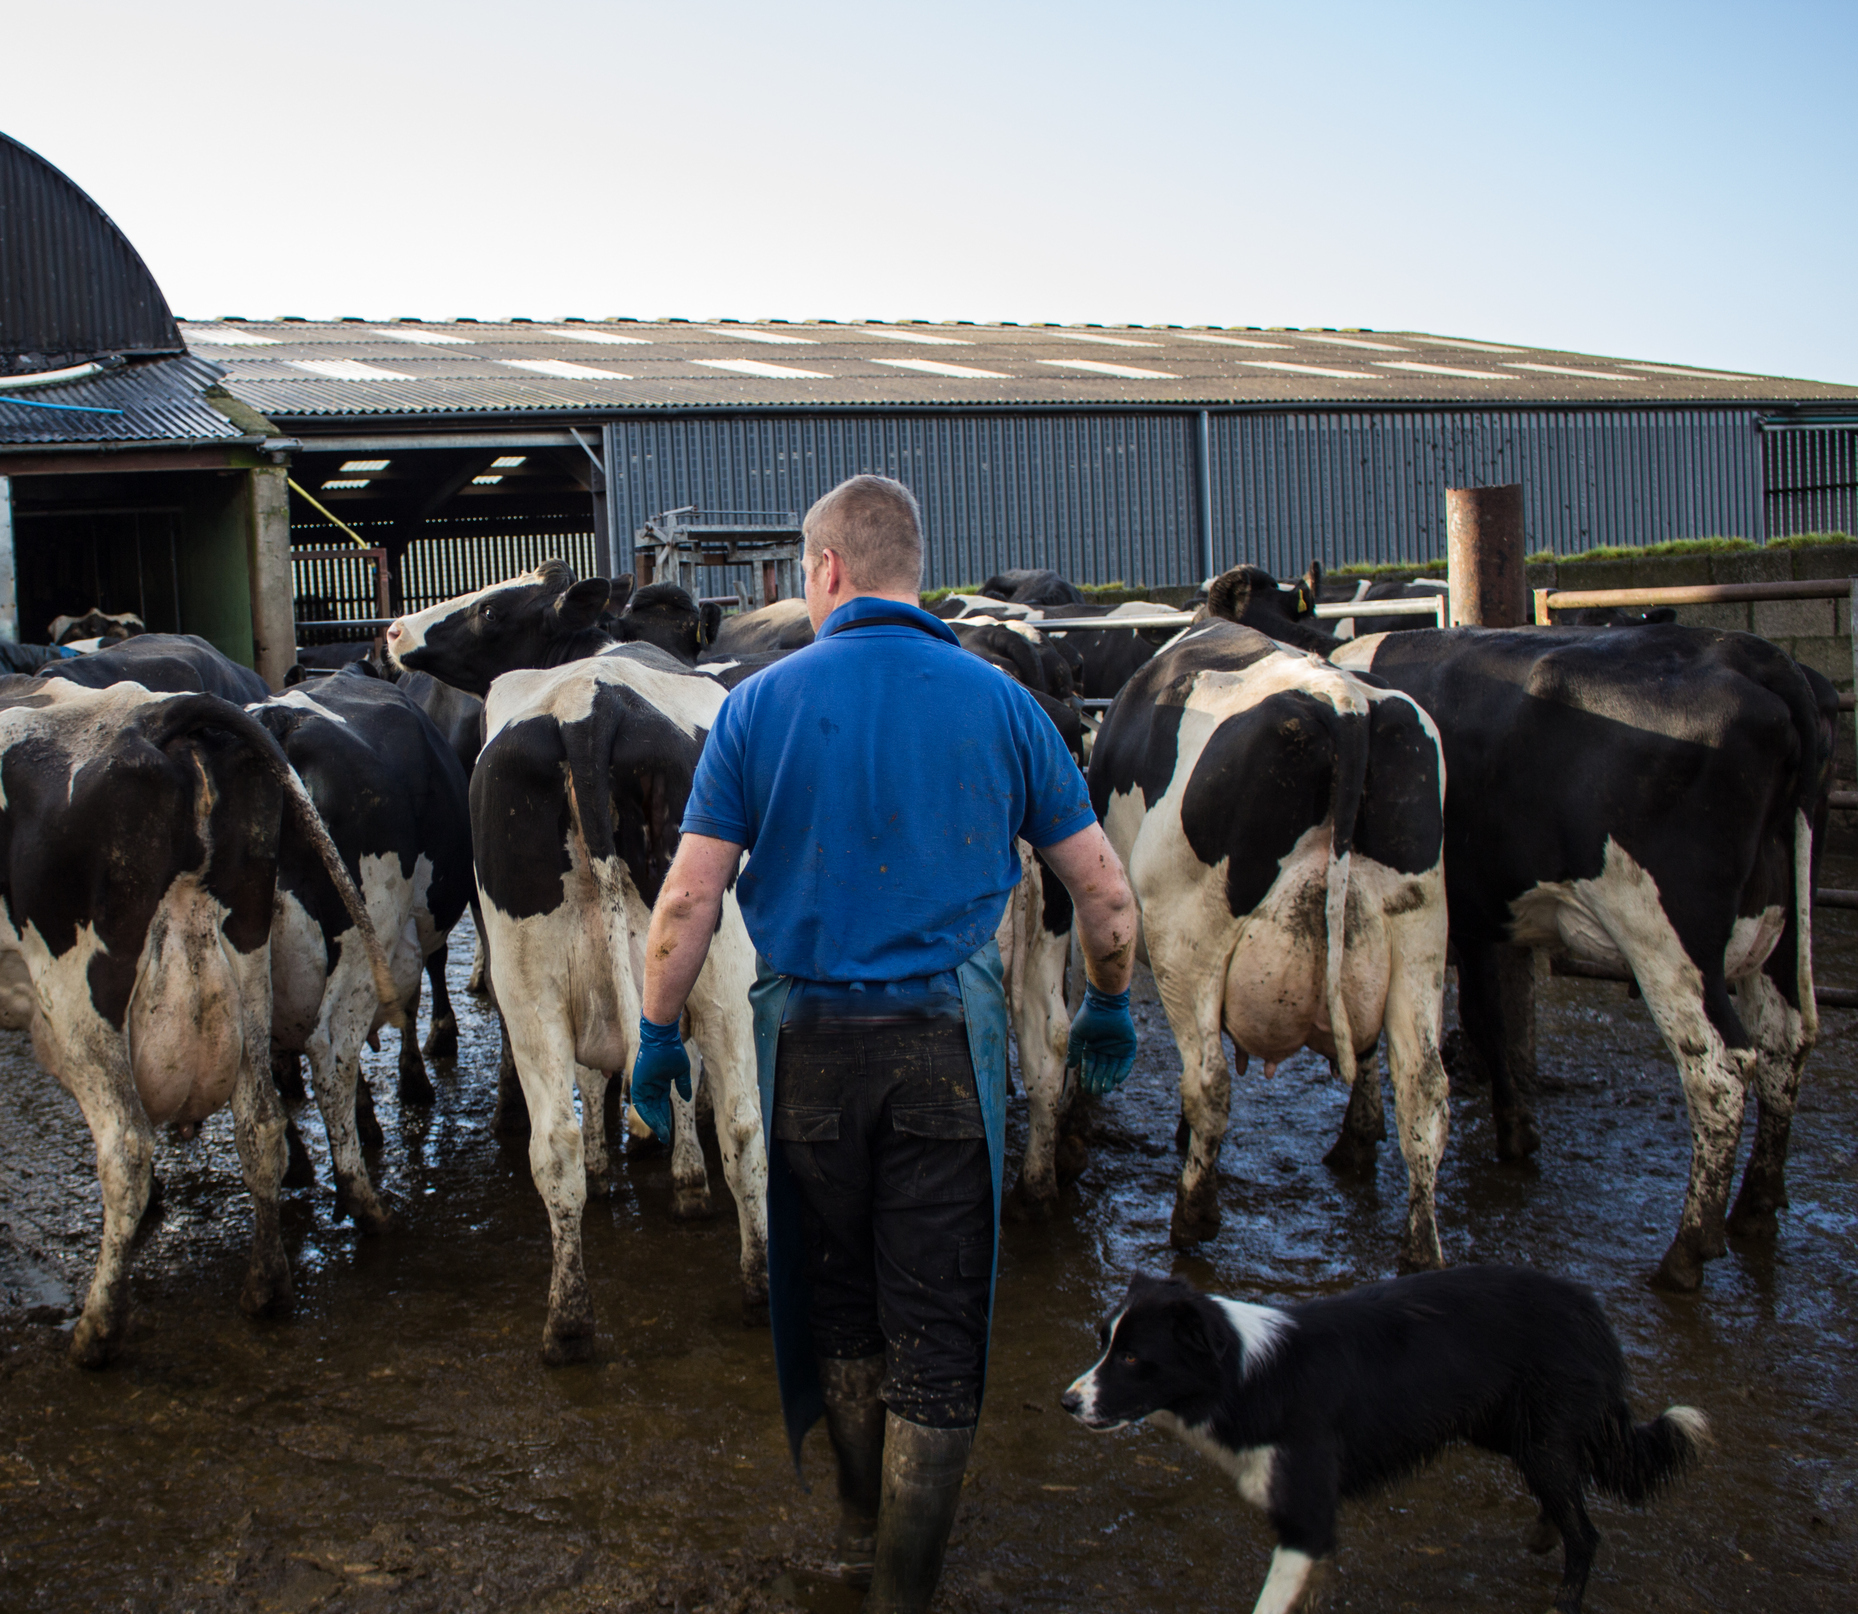 2016 was a "horrible experience" for dairy farmers